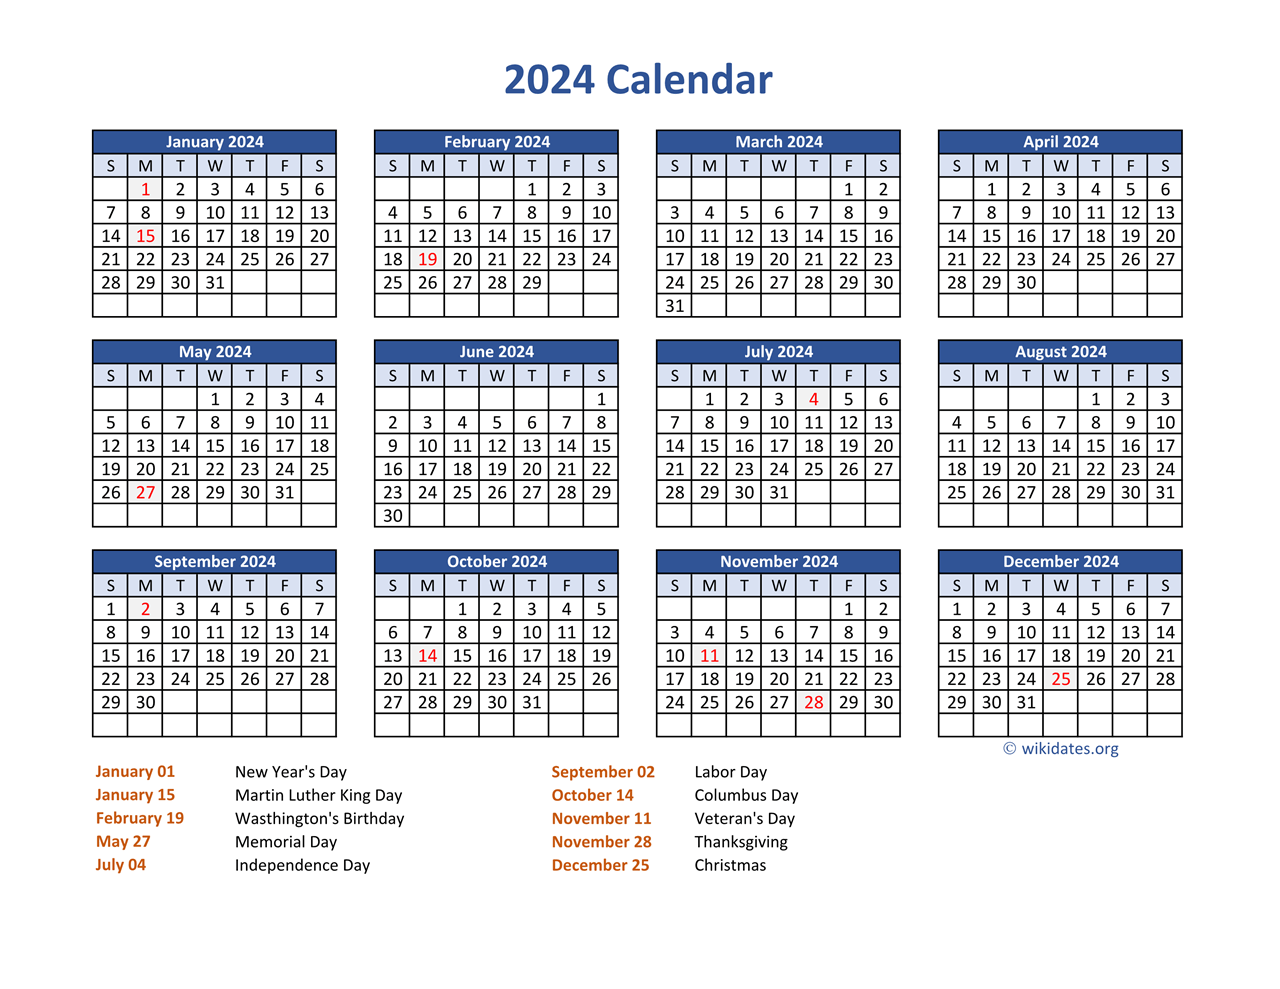 Pdf Calendar 2024 With Federal Holidays | Wikidates for 2024 Printable Calendar With Holidays